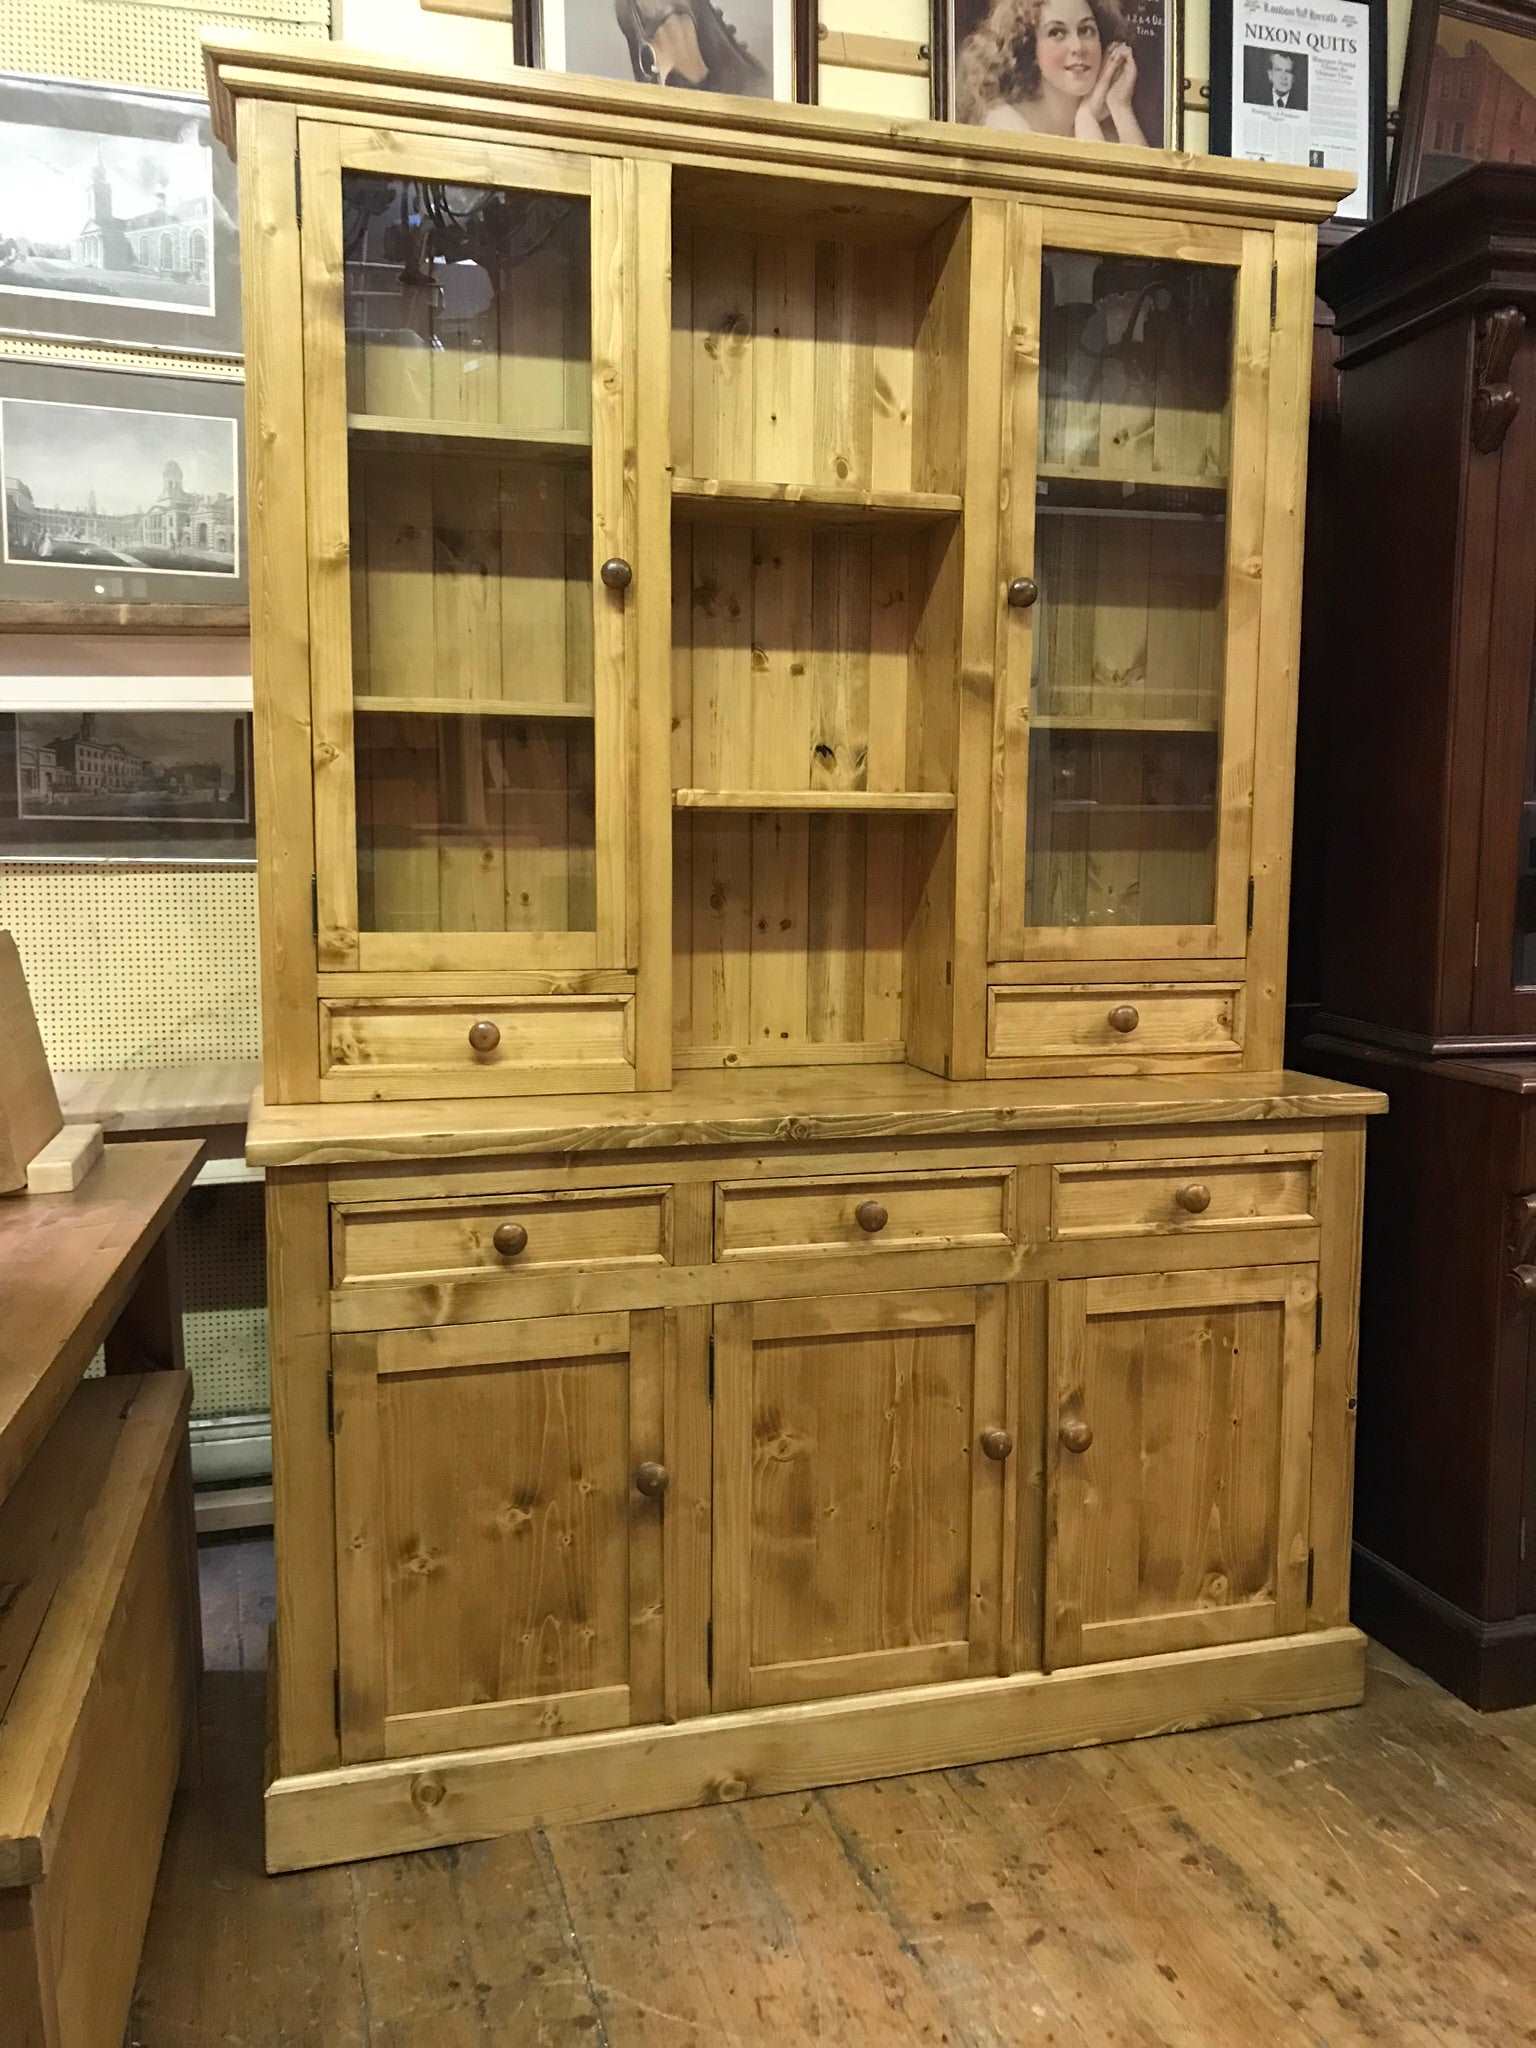 Kitchen Dresser -  Glazed doors with drawers on top